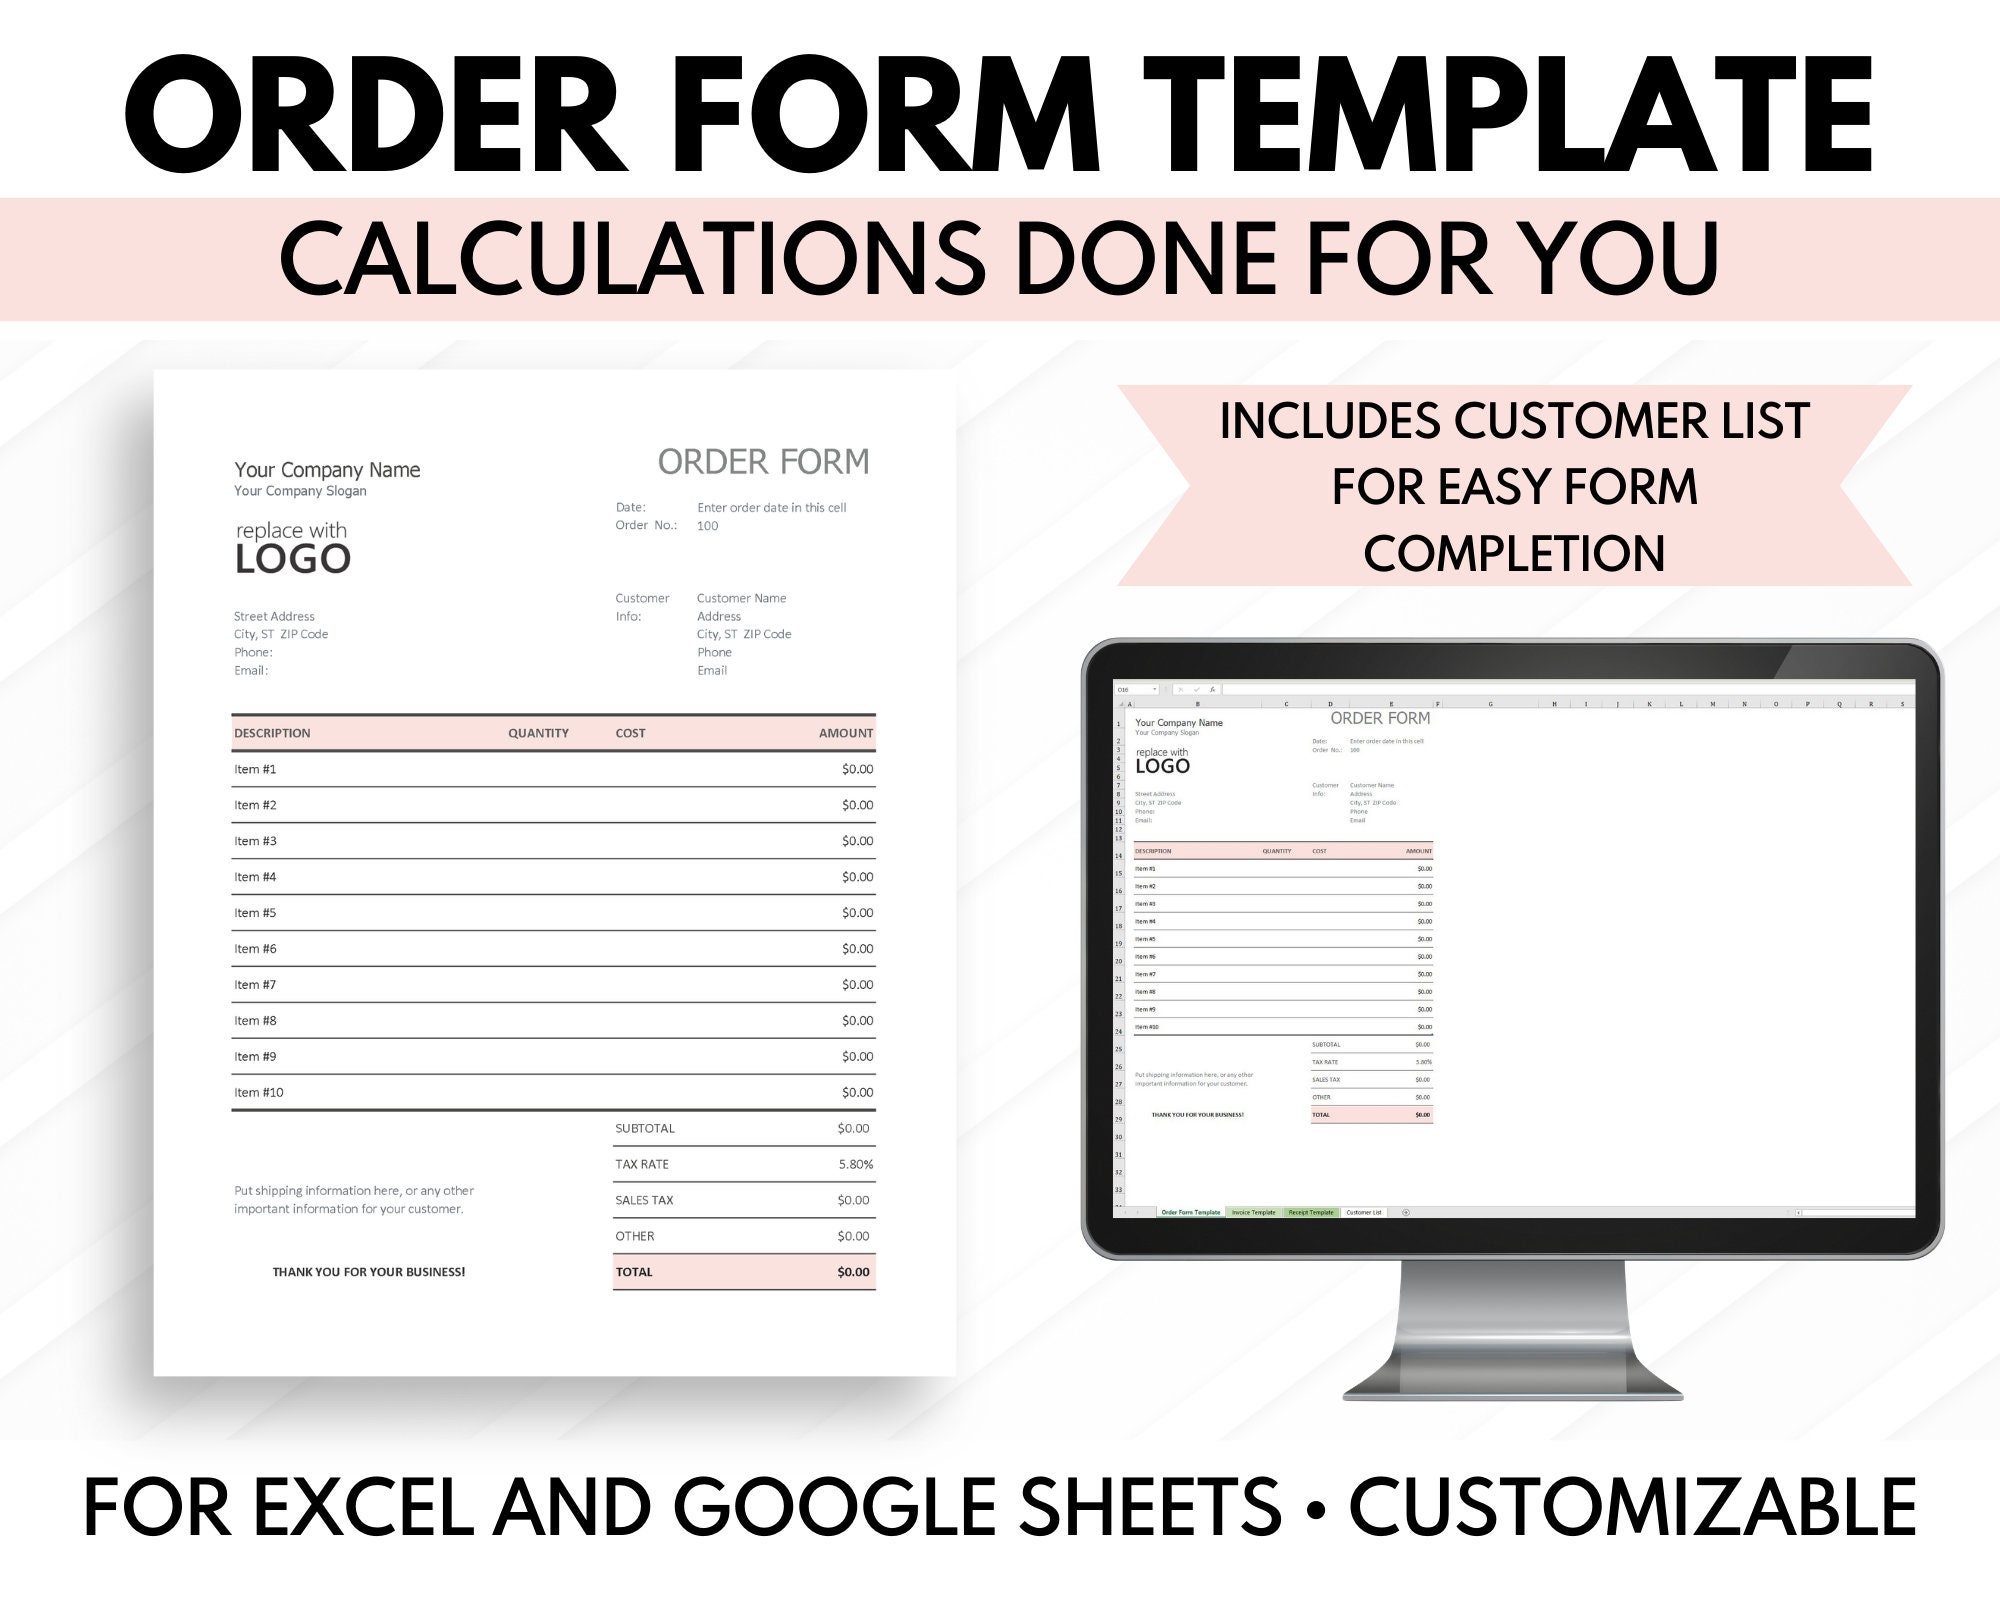 excel forms templates